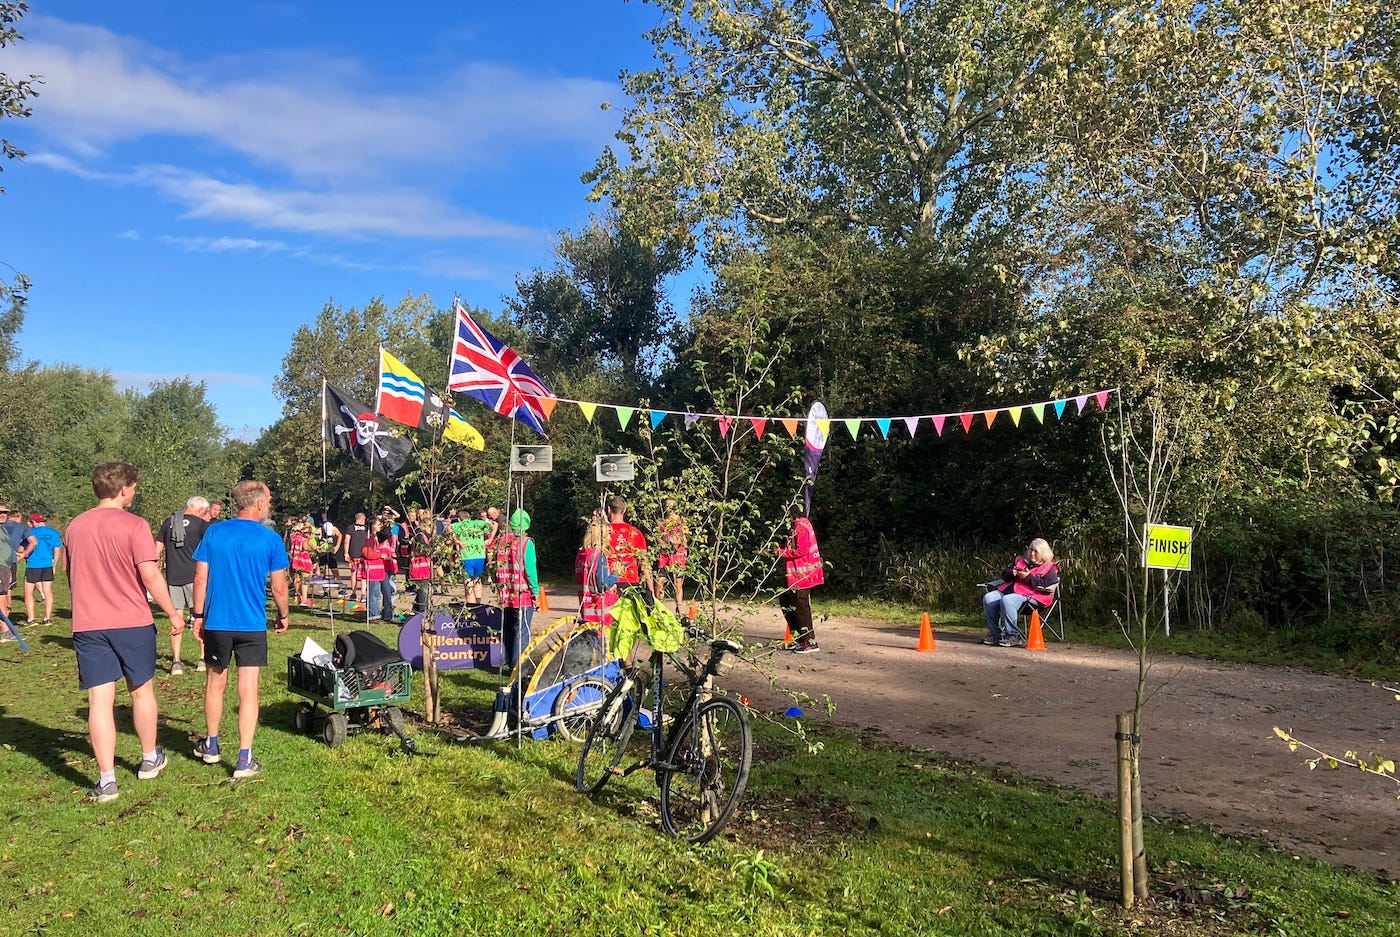 Bunting and flags mark the finish